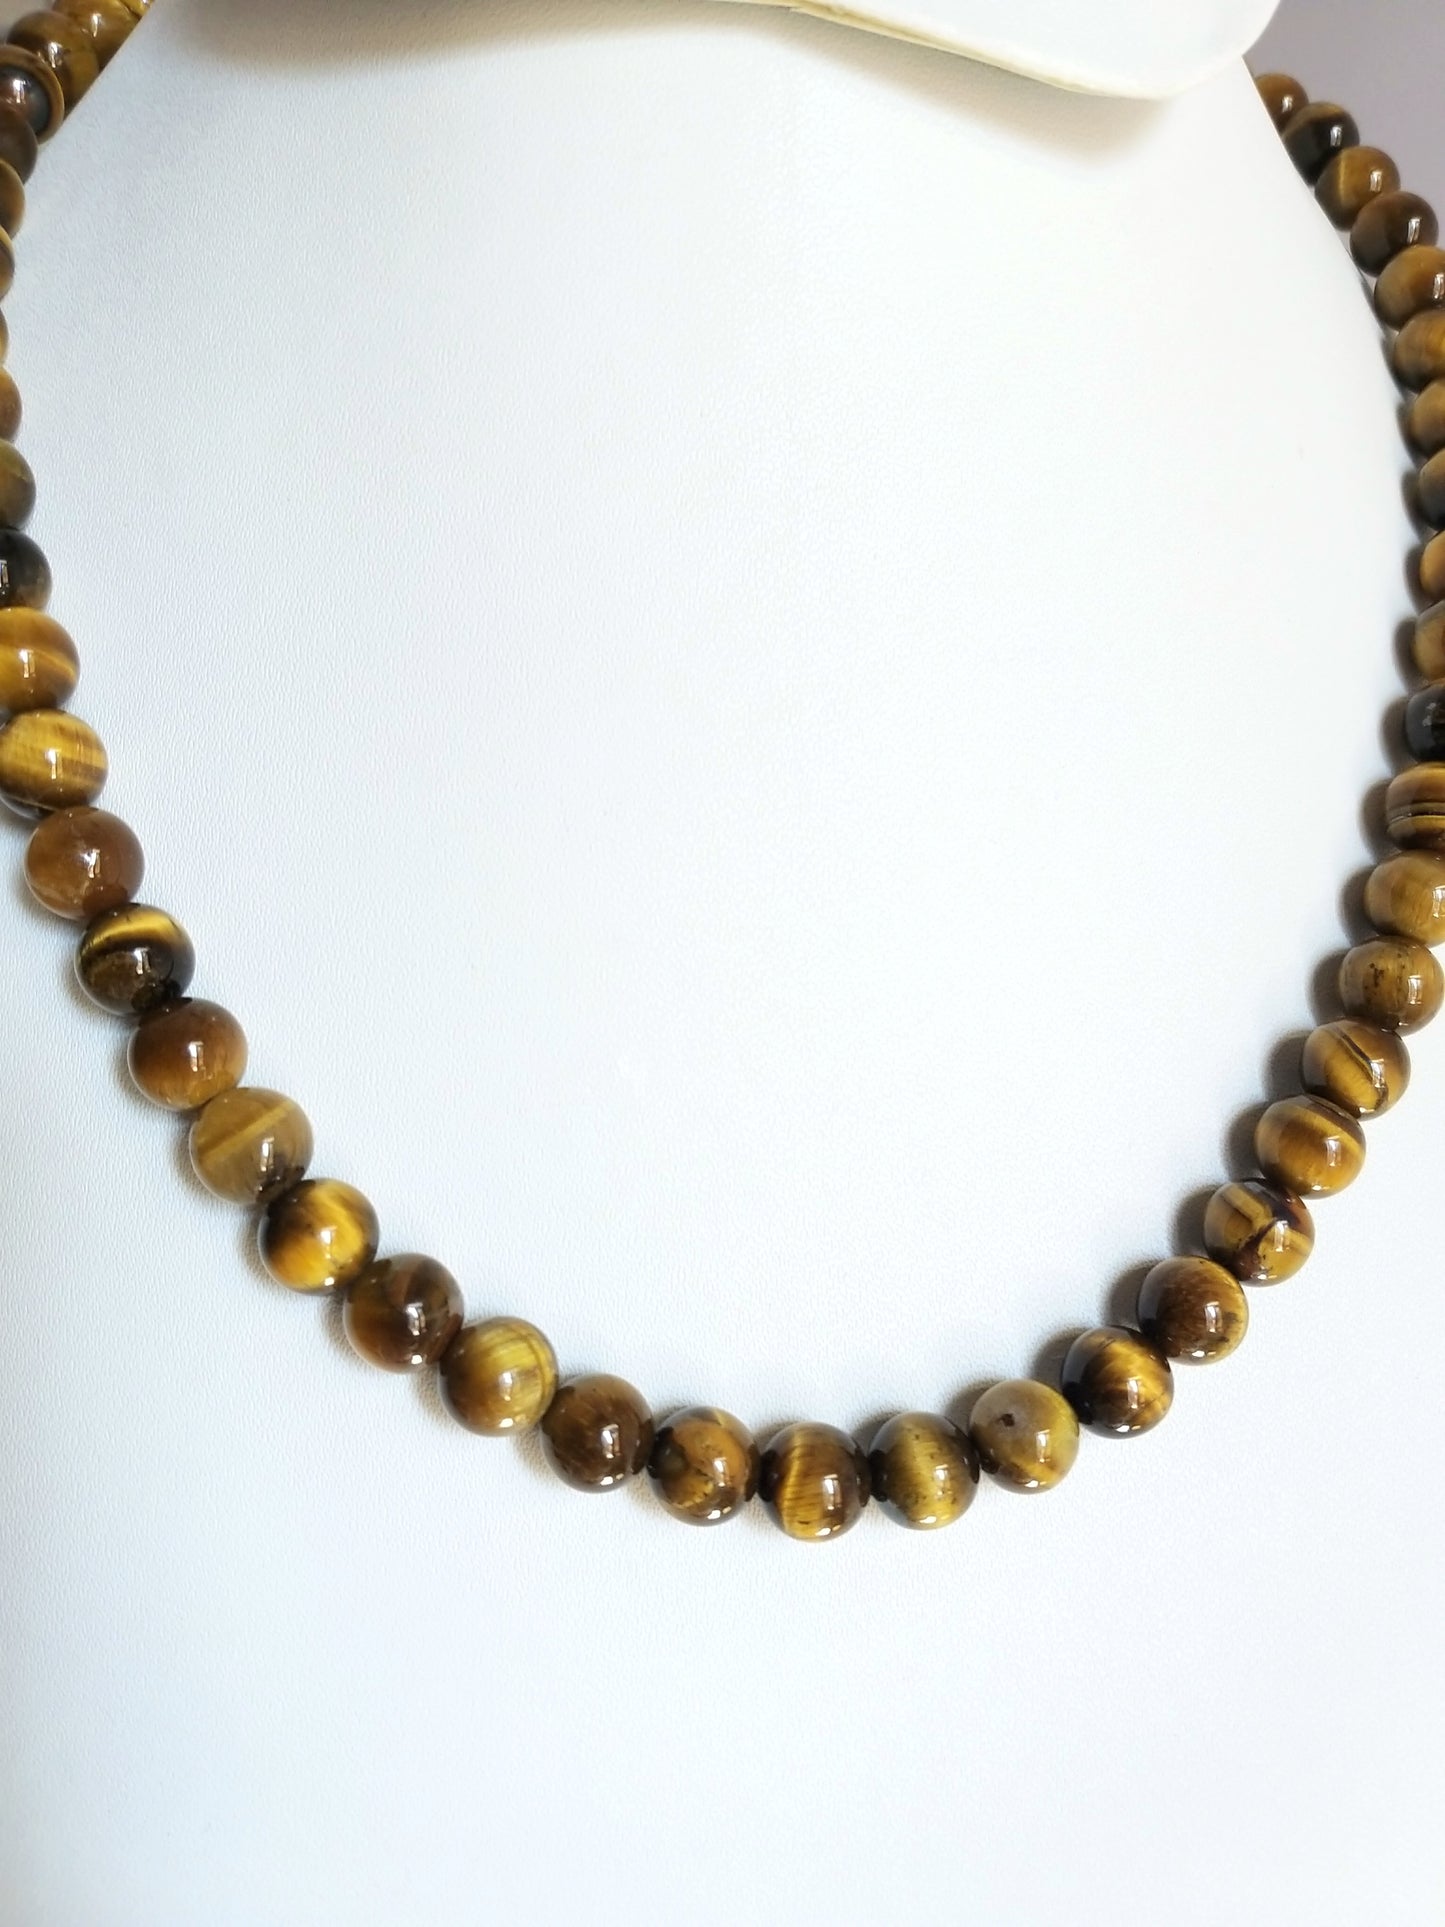 Natural Tiger's Eye Beads Necklace, Large Beads Necklace